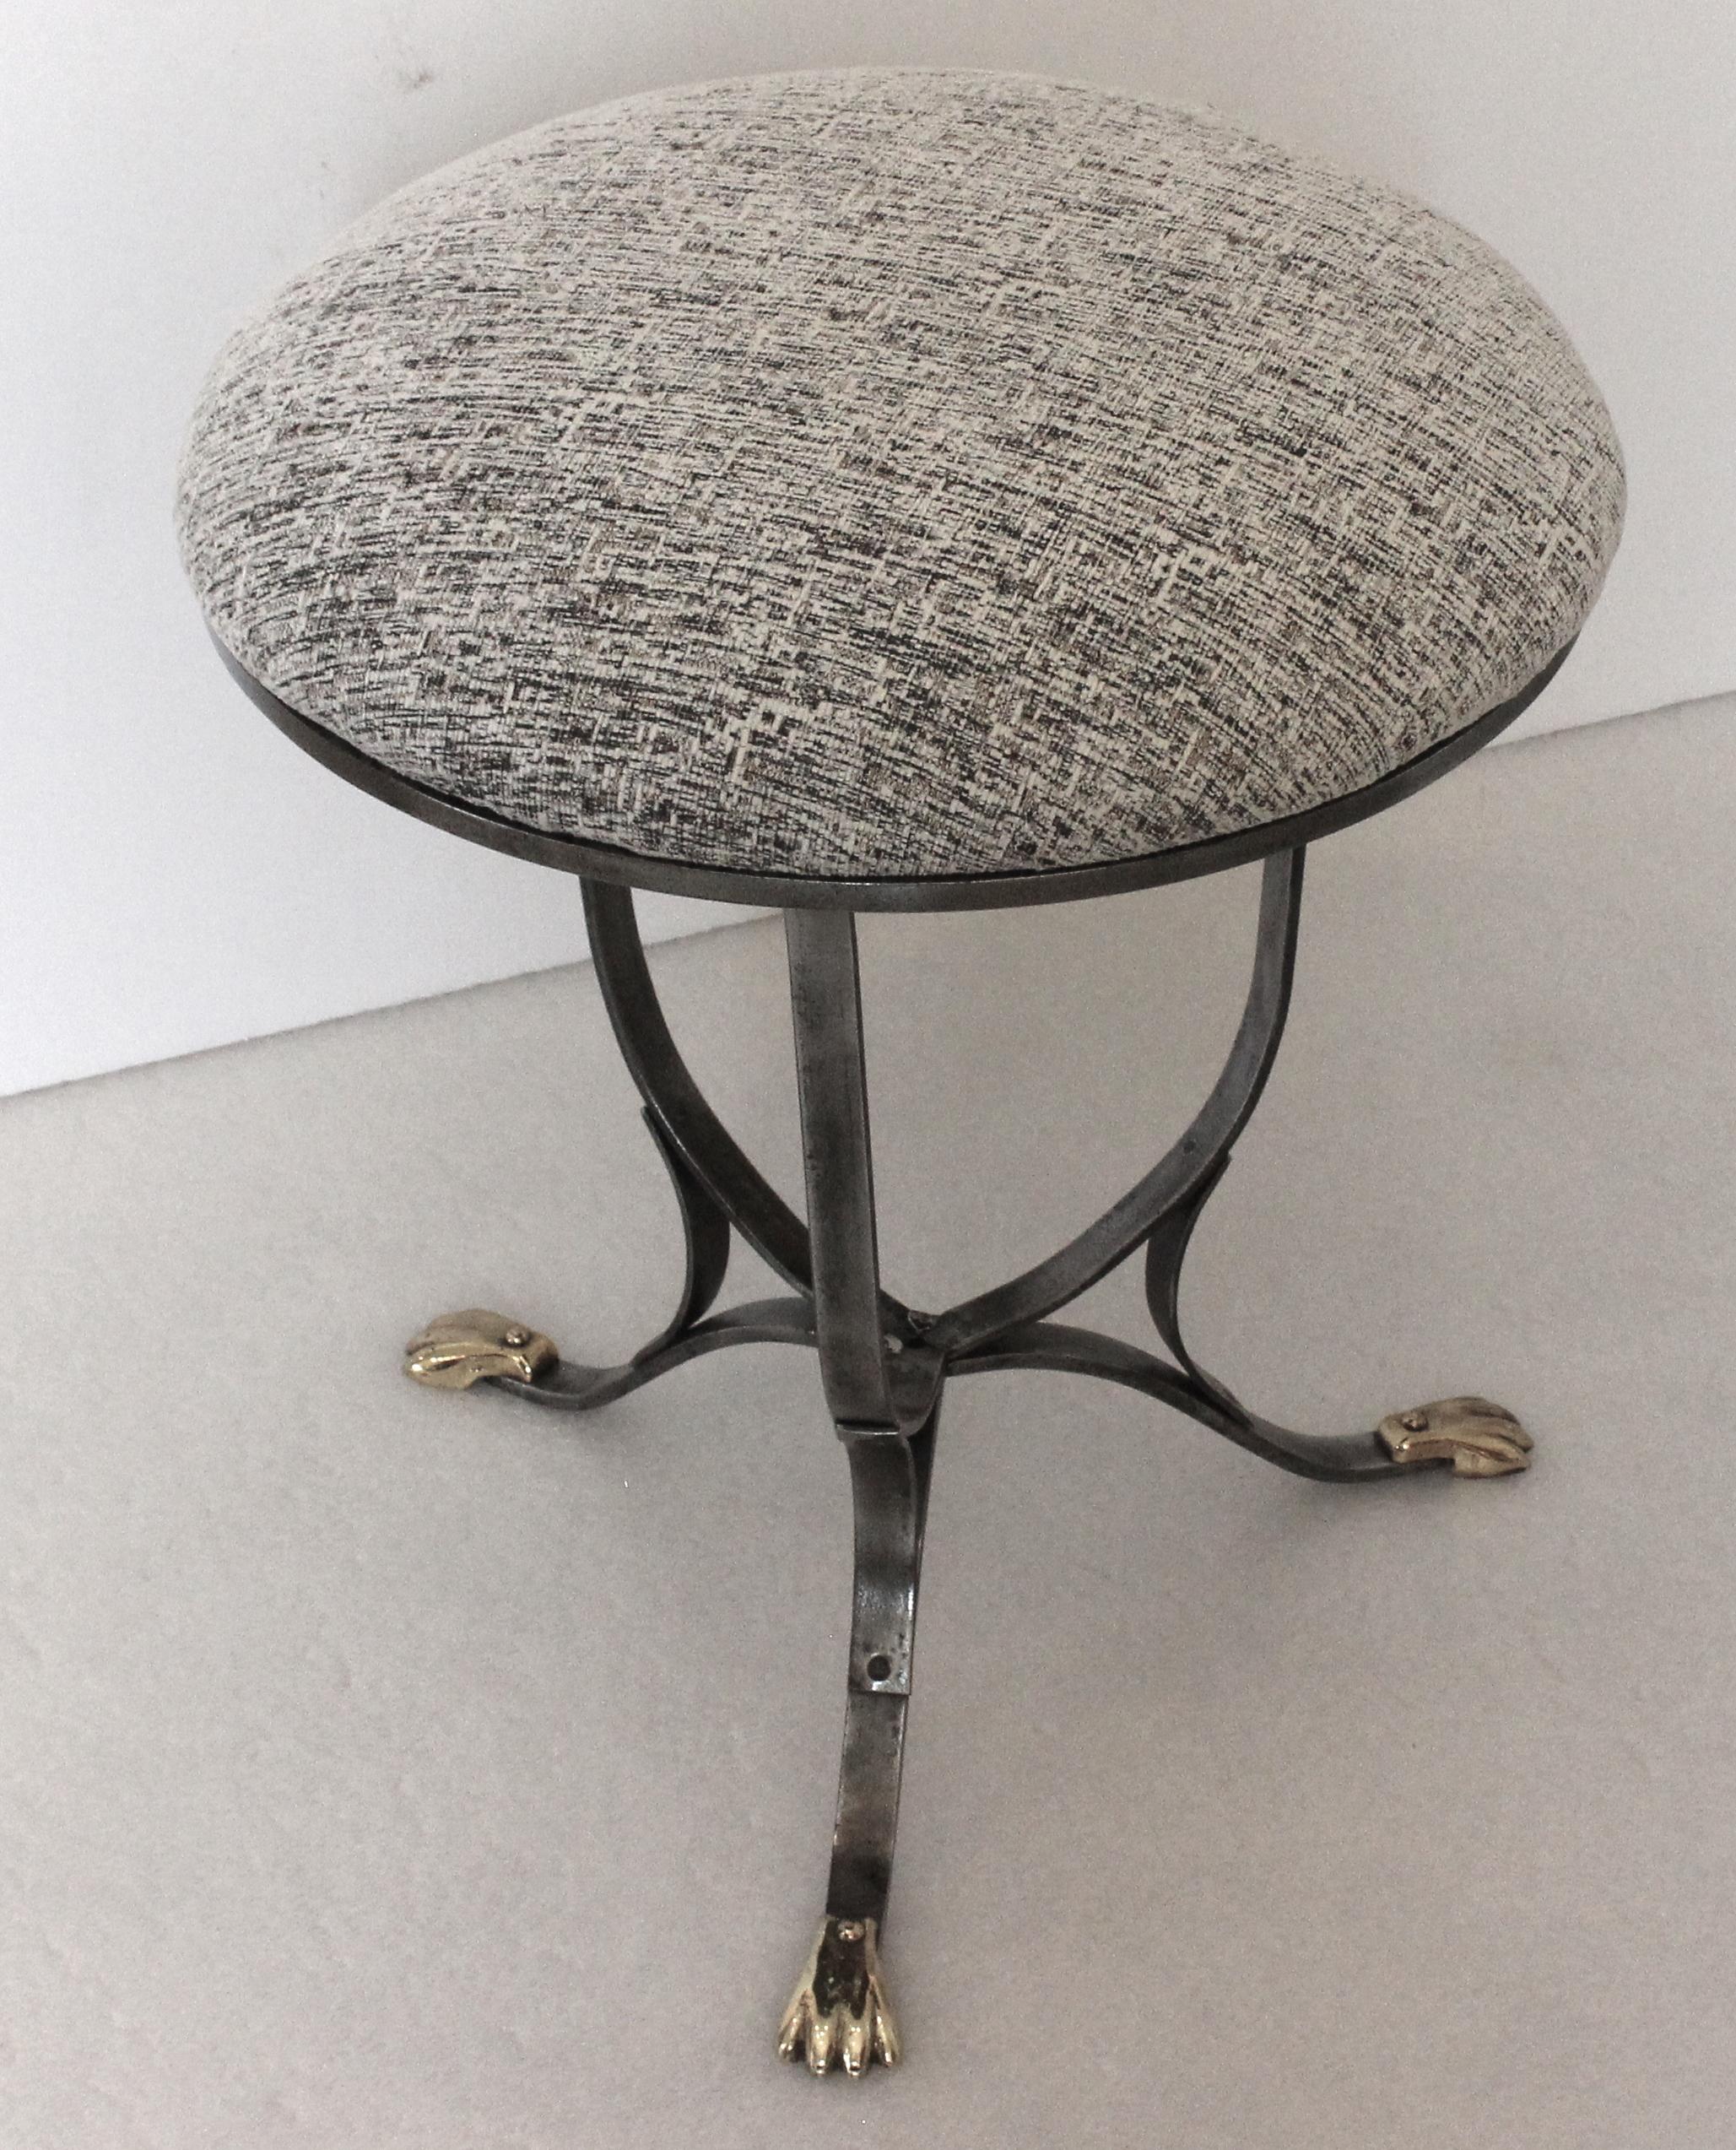 This stylish French Empire style stool is very much in the pieces designed for the campaigns of Napoleon and the piece was created by Trouvailles Furniture.

Note: The piece has been professionally polished, lacquered and upholstered in a woven